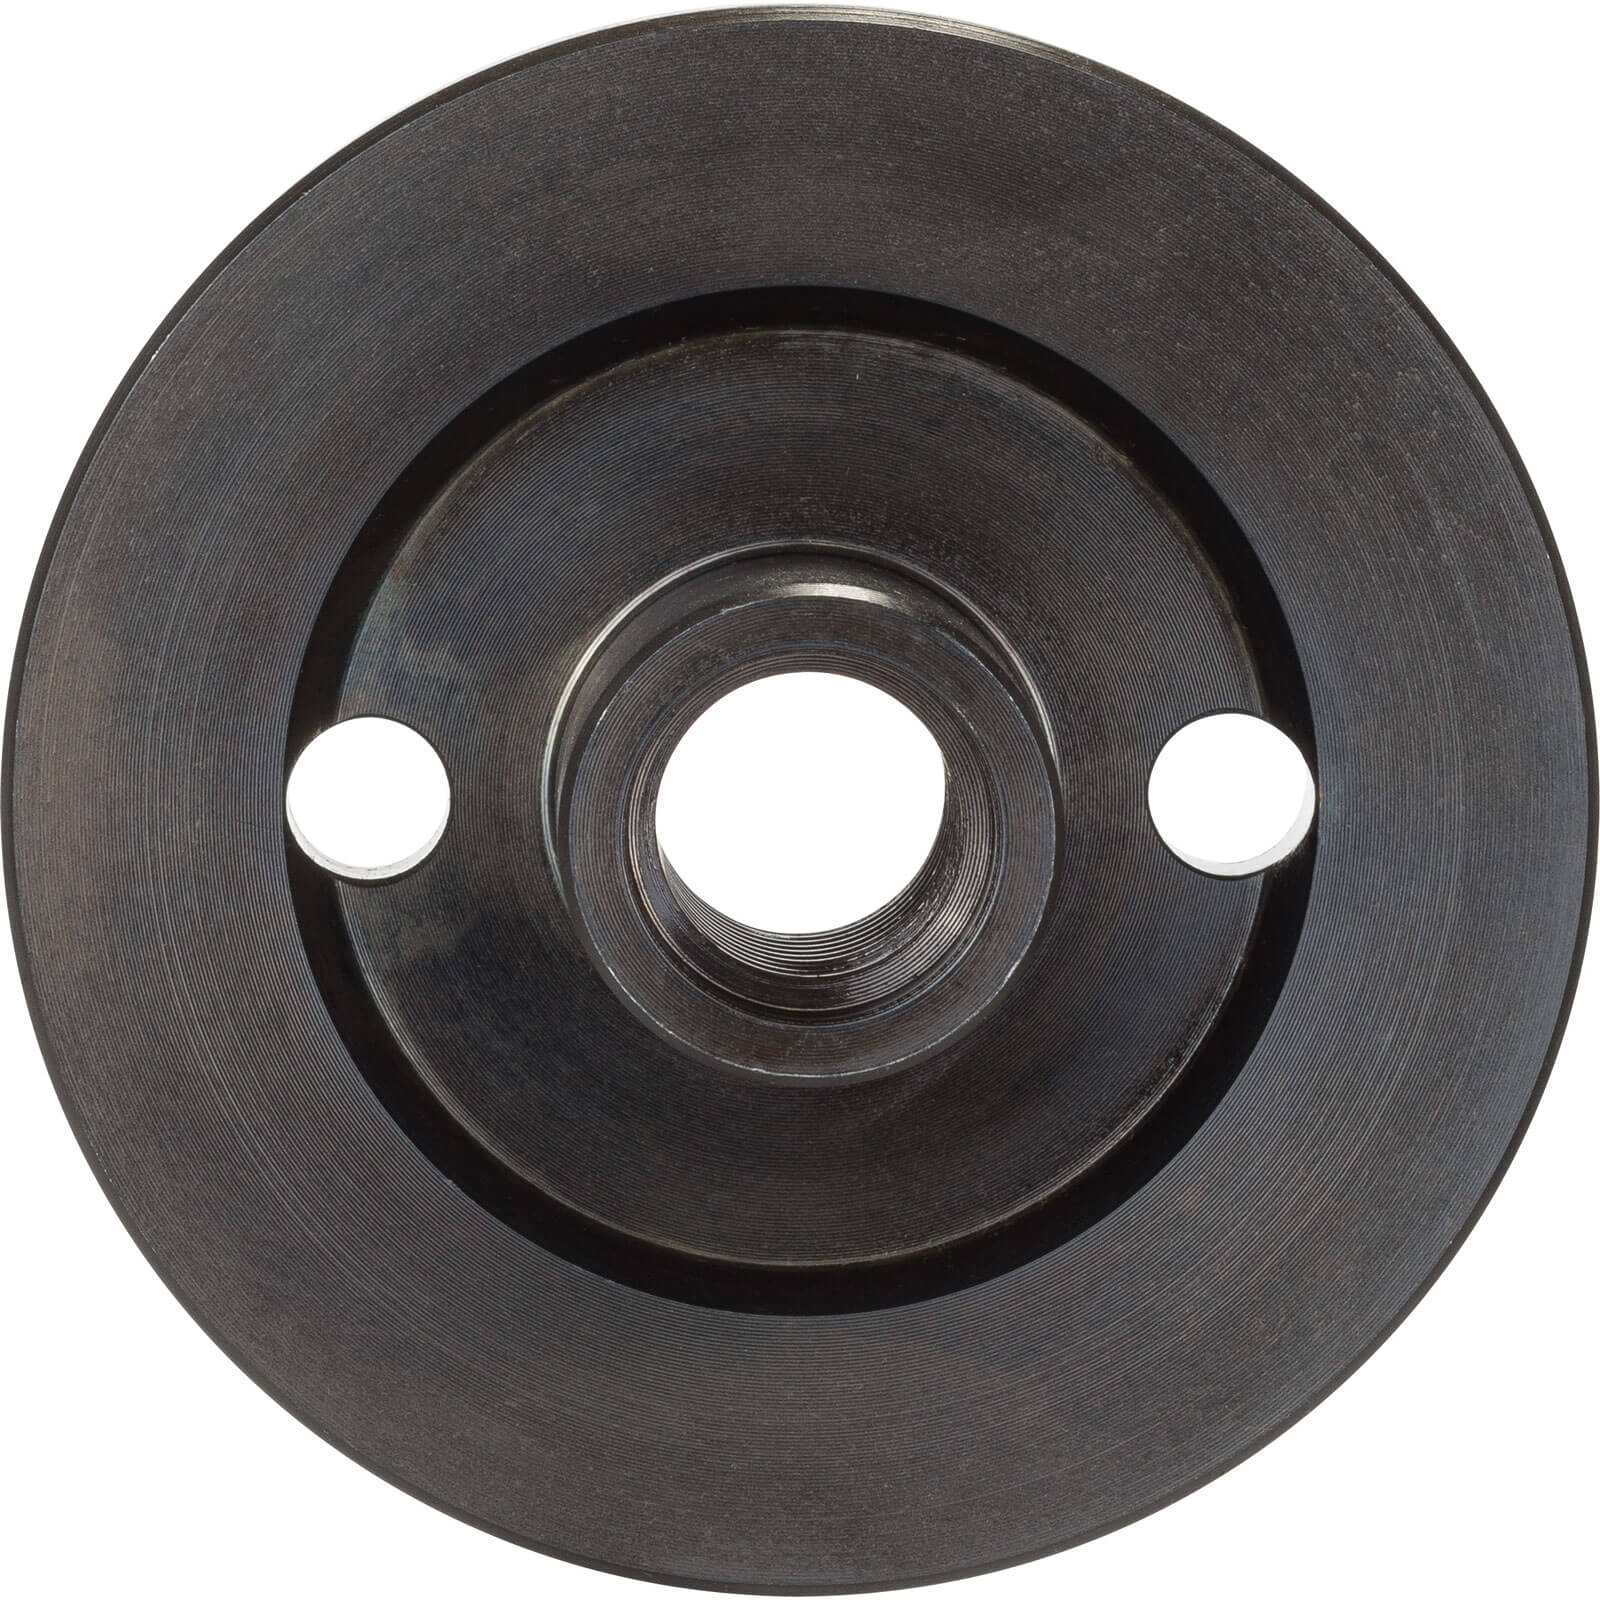 Image of Bosch Round Locking Nut for Flat Disc GCS Cutter